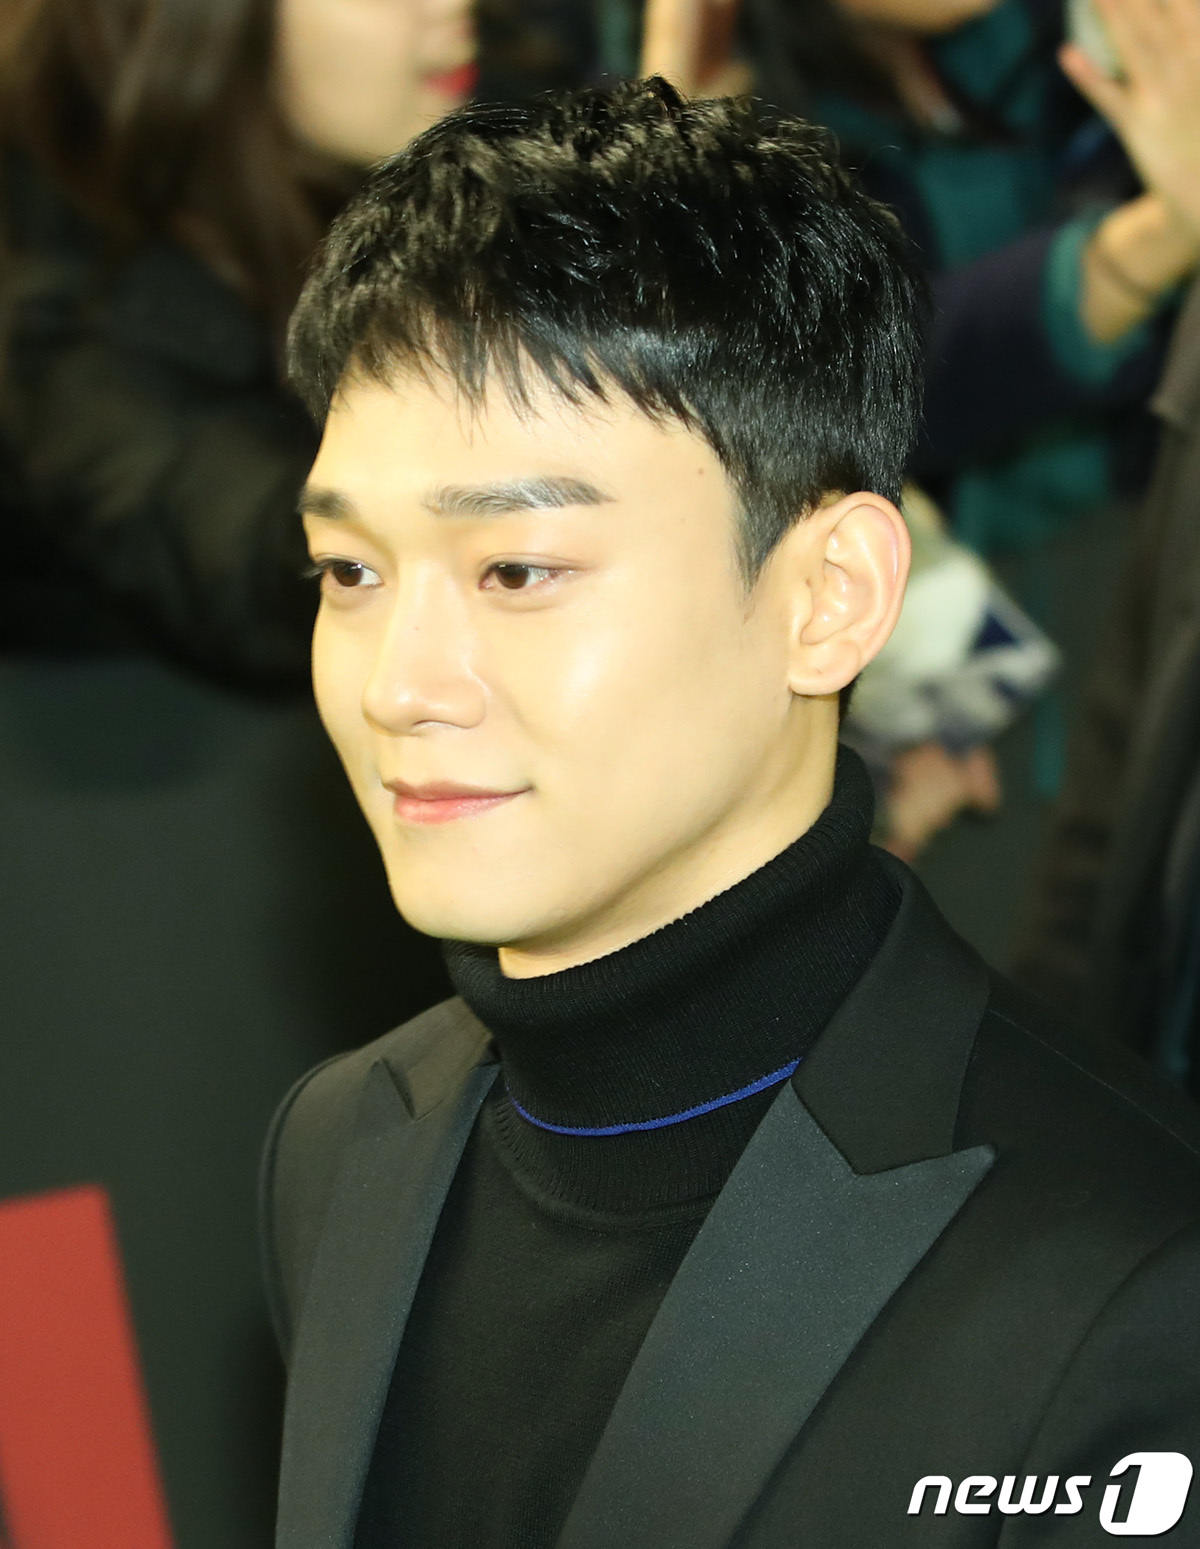 On the 29th, an official of SM Entertainment said, Chen has been a big girl today.Chens wife had a daughter Child Birth at a maternity clinic in Cheongdam-dong, Seoul, known as Child Birth earlier than scheduled.Earlier, Chen formulated marriage on January 13; Chen wrote in a handwritten letter, I have a girlfriend who wants to spend her whole life together.Then, blessing came to me, he said, notifying marriage and pregnancy news.On the other hand, Chen has released various hits after debuting as a group EXO in 2012, and is actively working as a soloist.